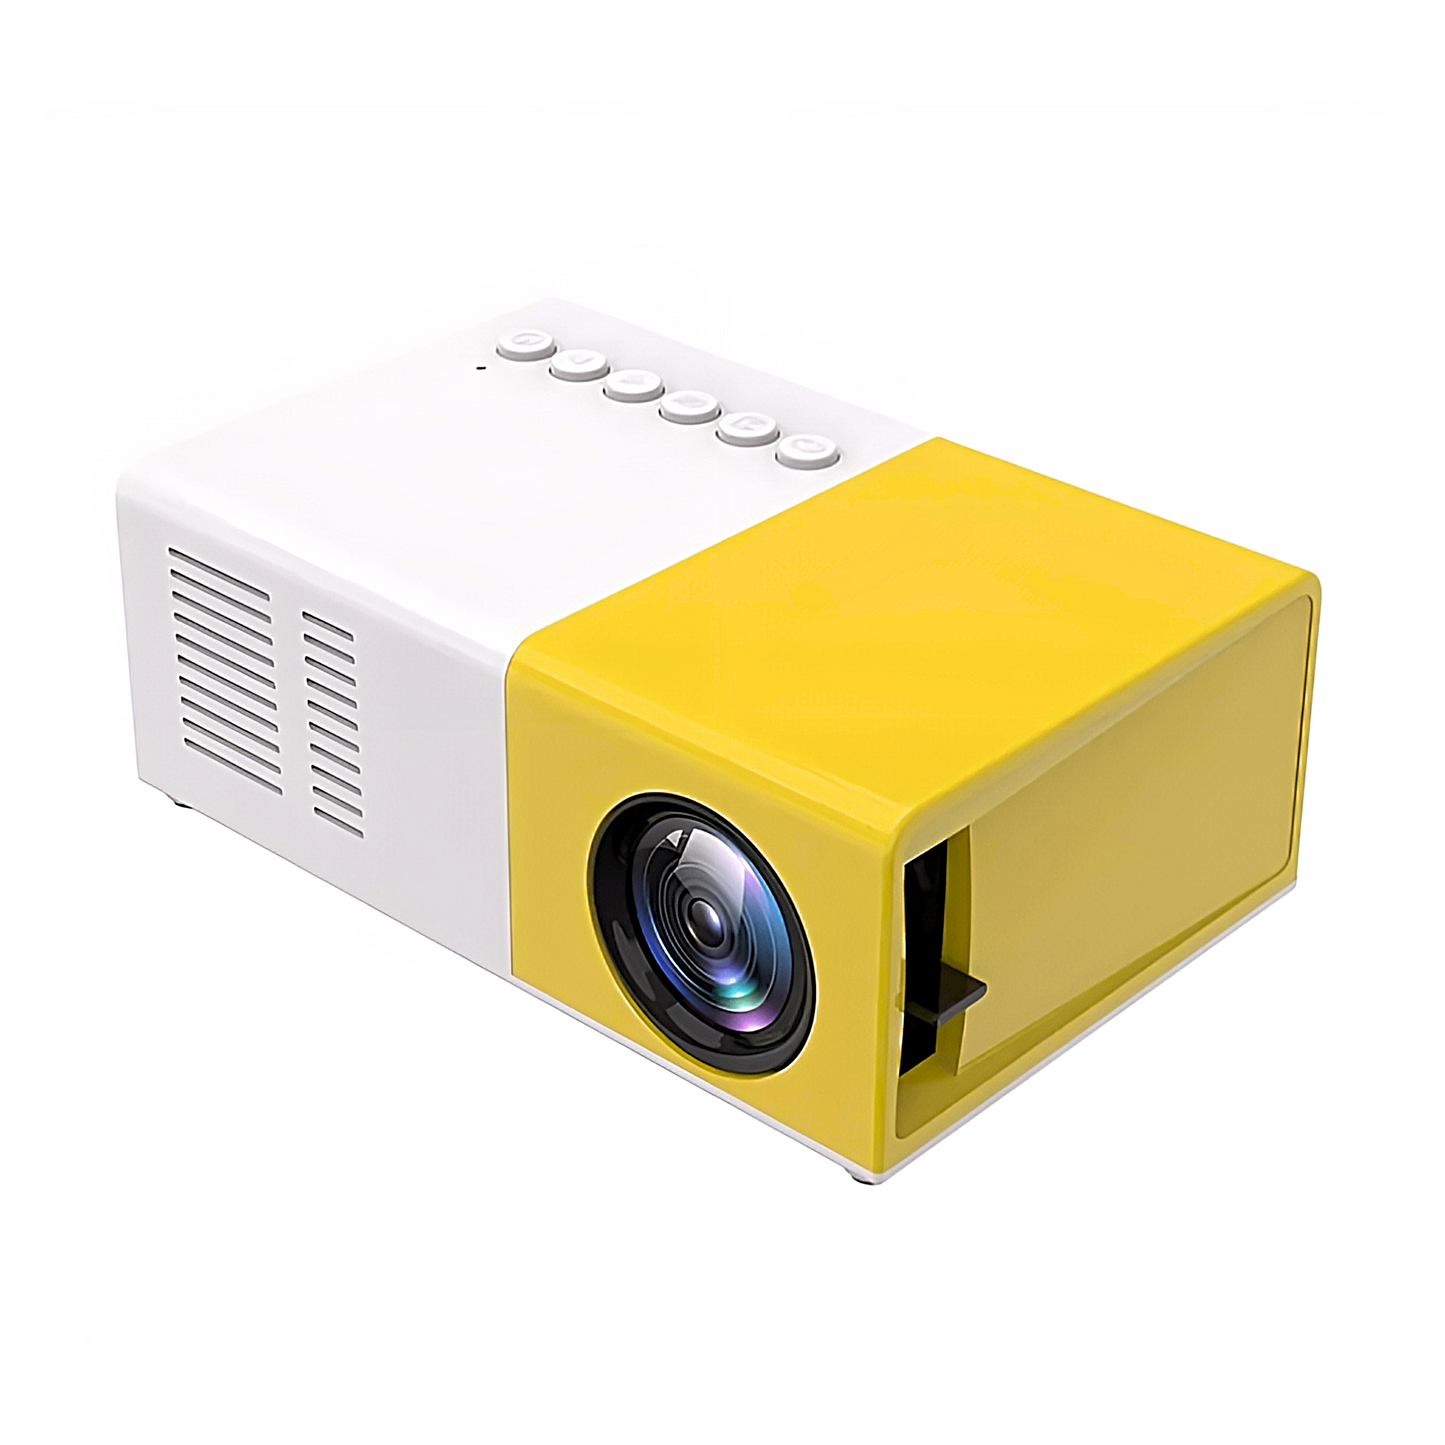 Slimme projector